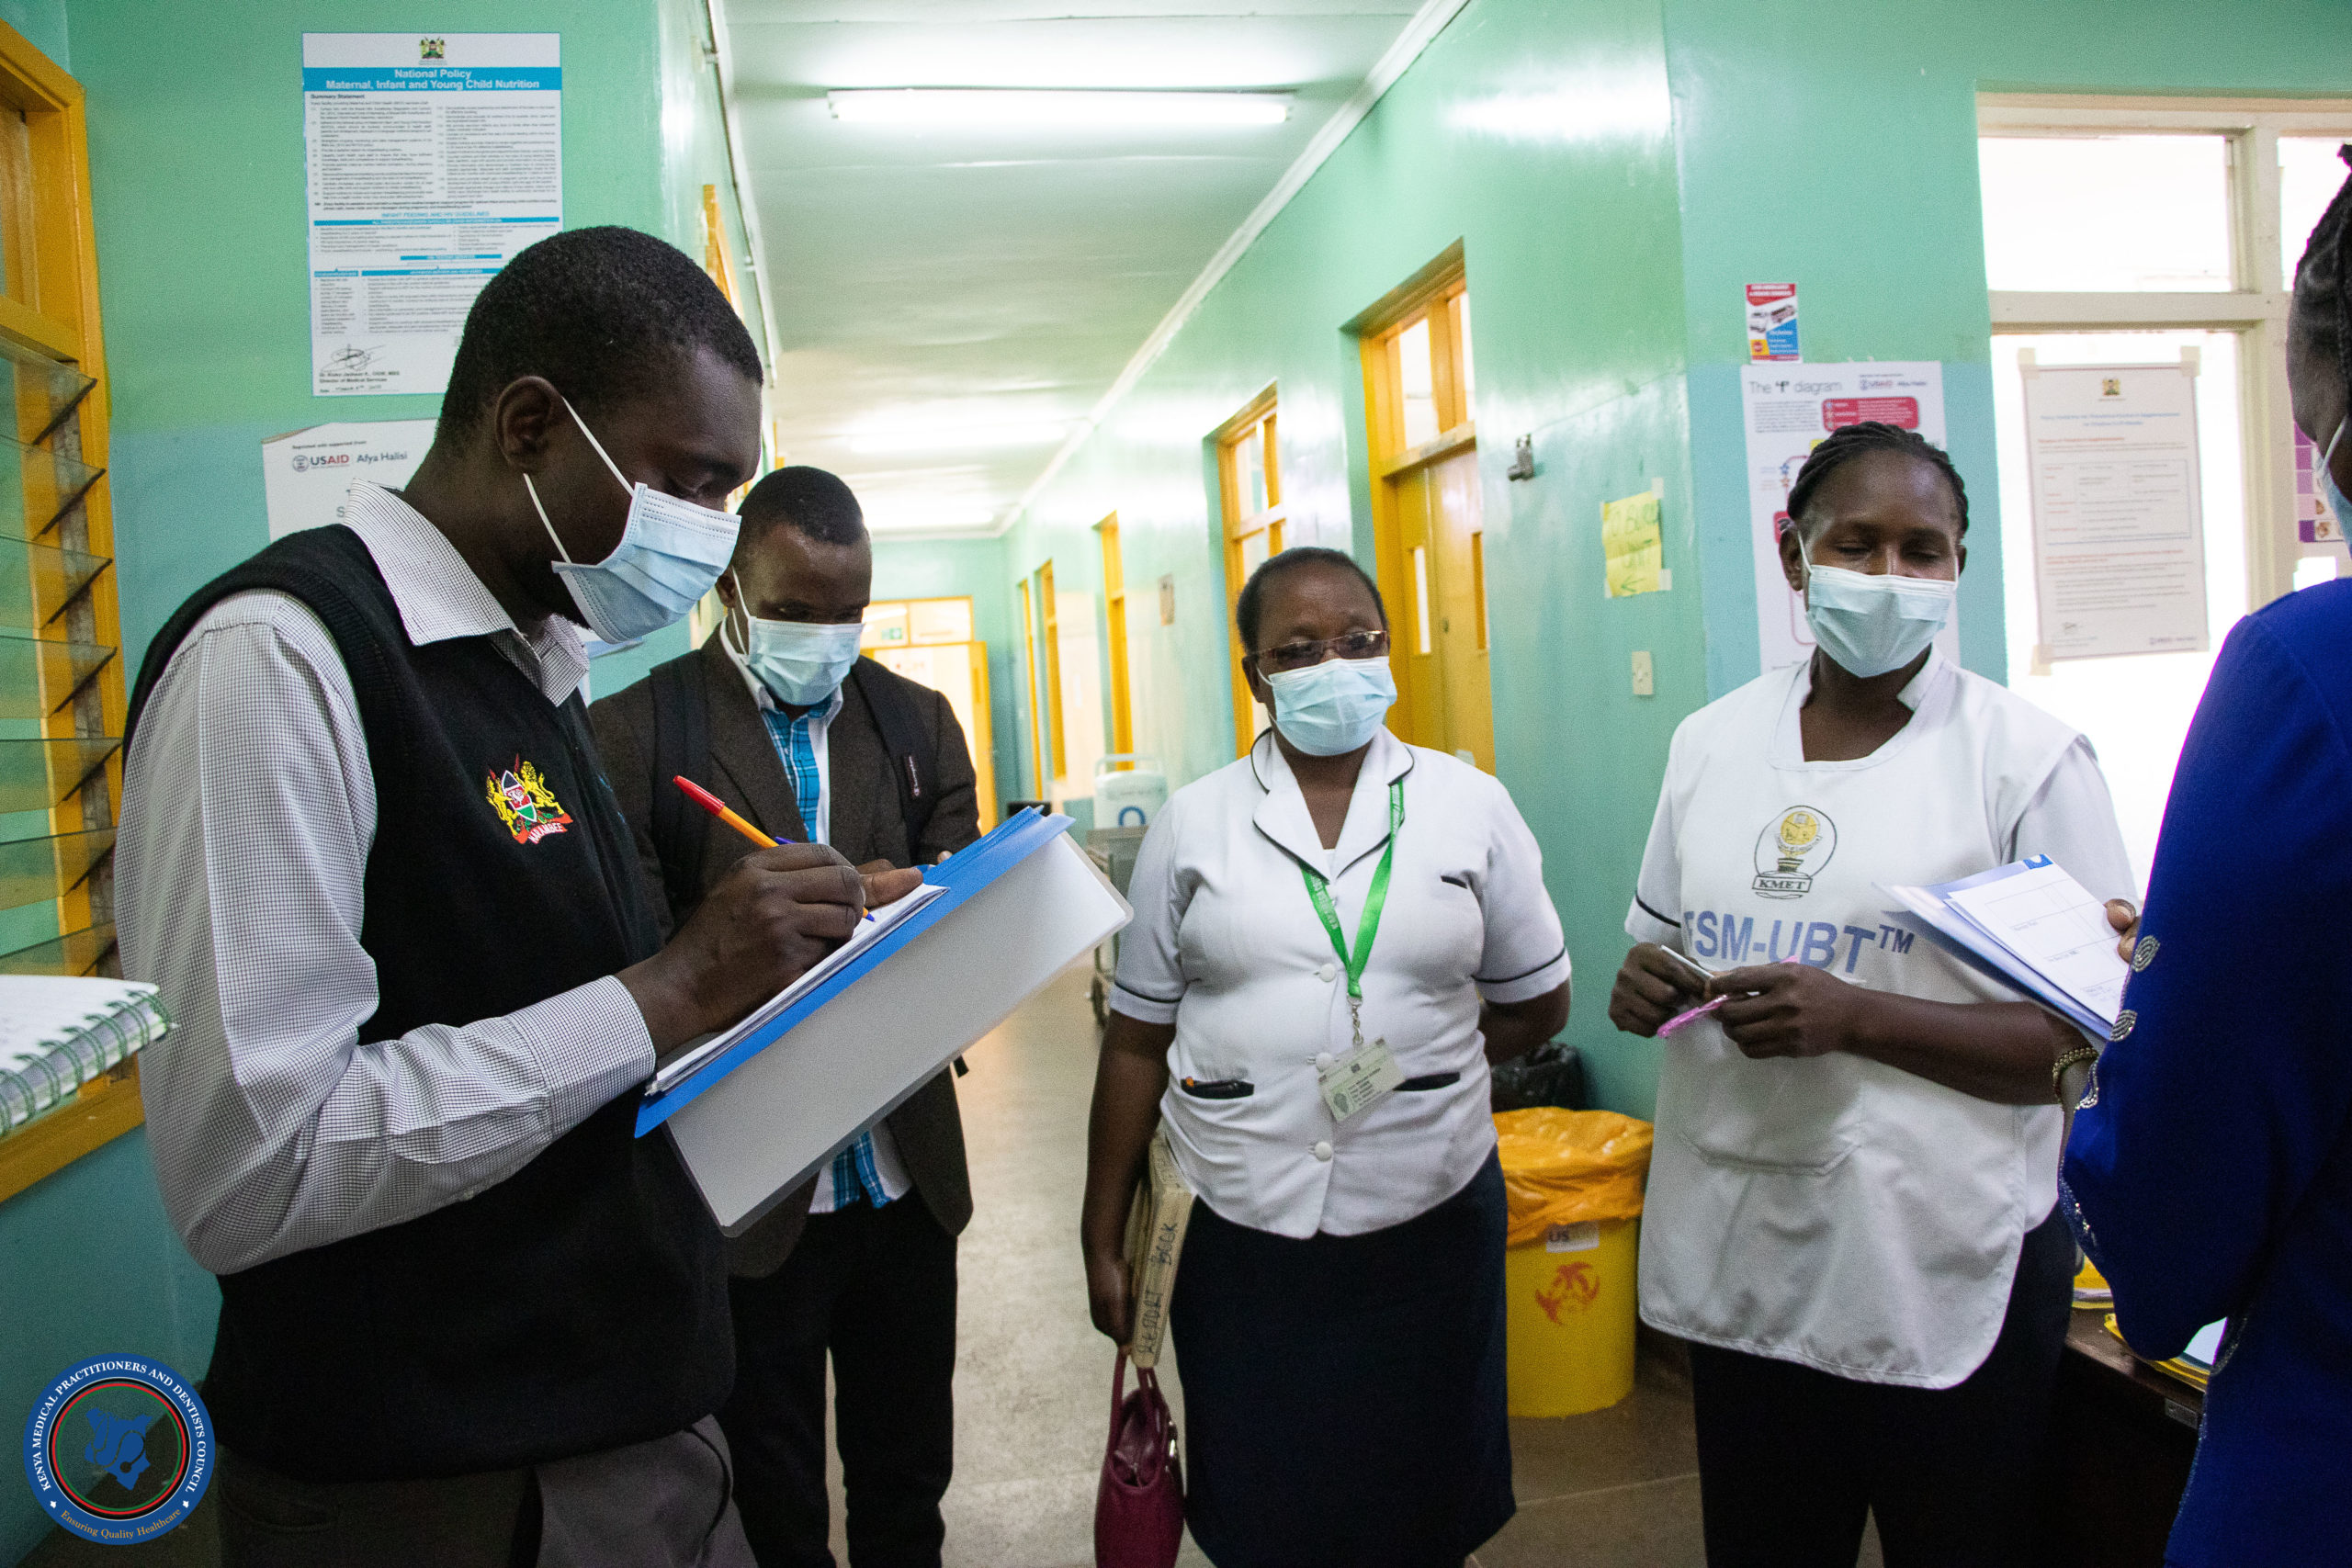 School Girl Sex Videos Rajwap Com - Telemedicine Gains Pace In Kenya as KMPDC approves 20 Hospitals to roll out  services amid Covid-19 containment measures â€“ Kenya Medical Practitioners  and Dentists Council